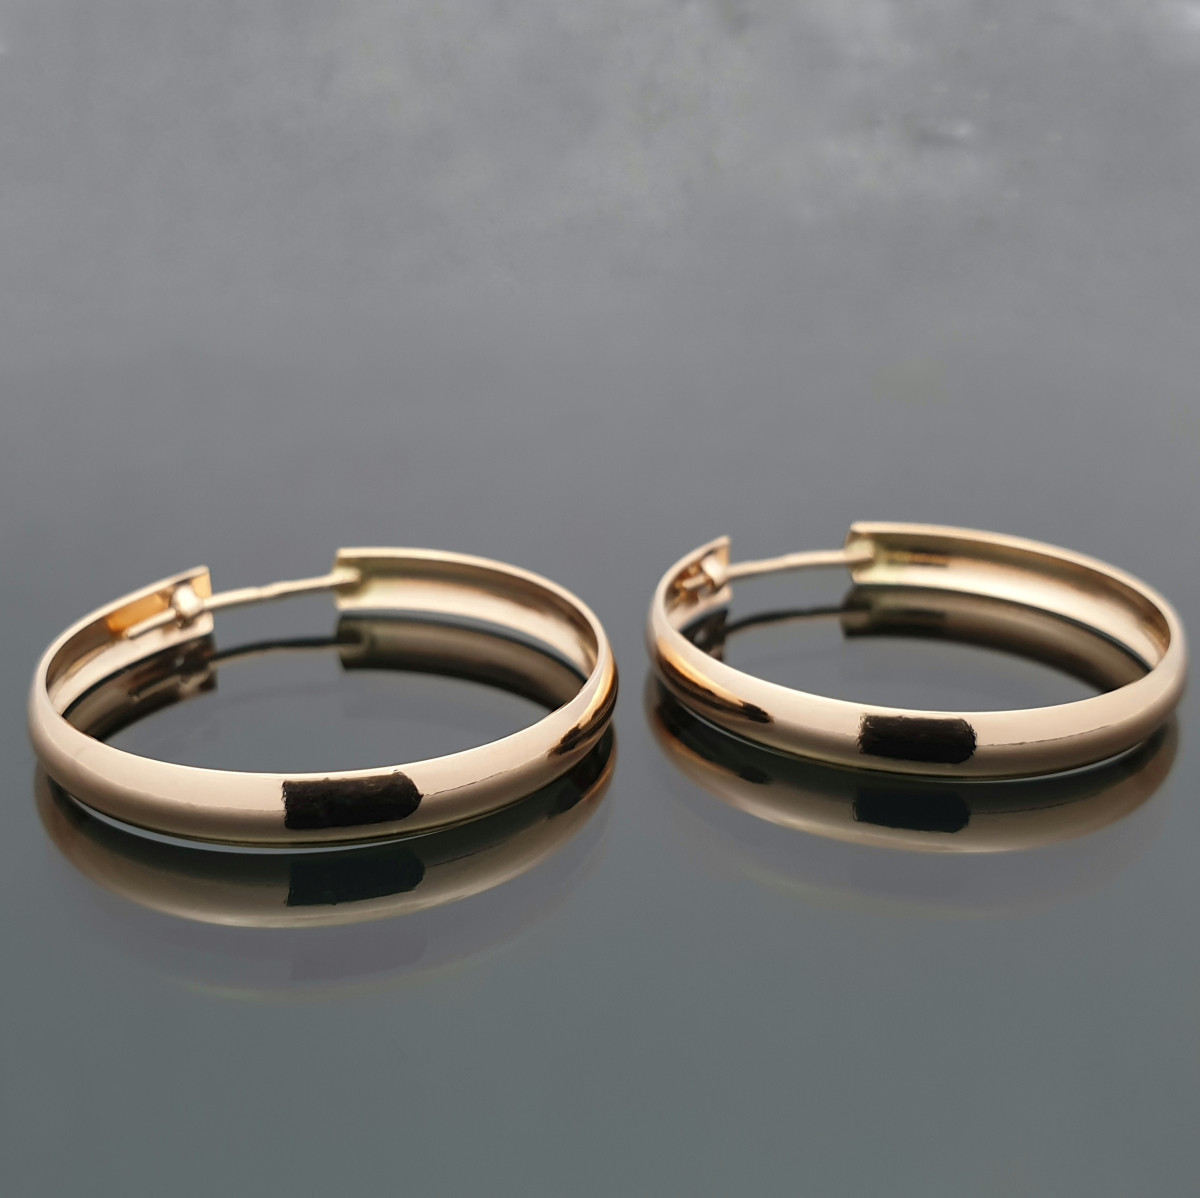  Wider round gold earrings